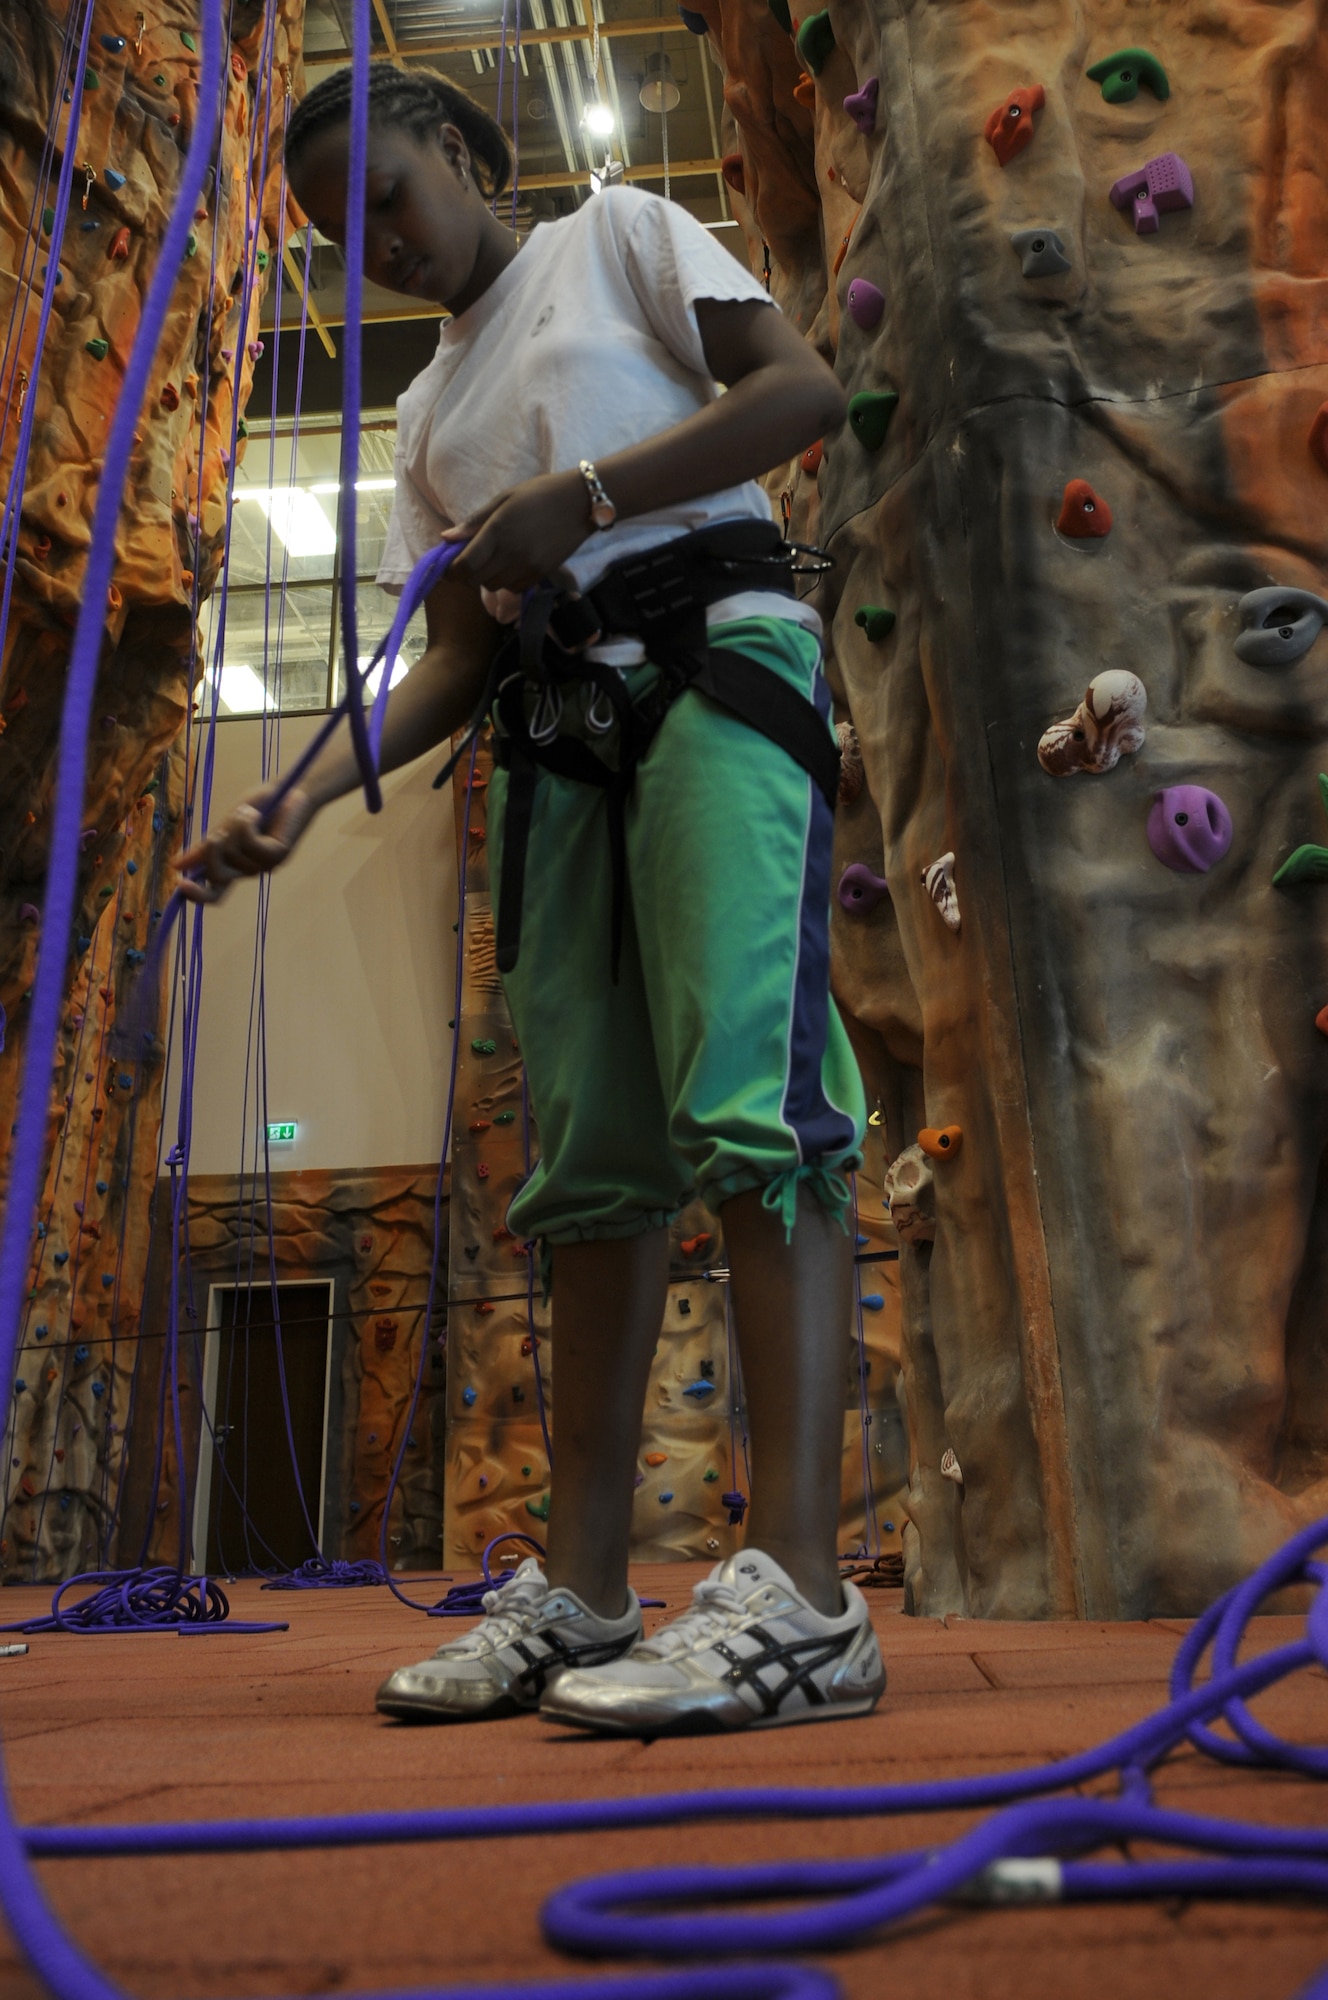 Qiara Burris, daughter of Capt. Charmaine Burris, 603rd Air Operations Center cyber operations chief, prepares to climb the rock wall at Outdoor Recreation during Basic Recreation Adventure Training camp, June 16, 2009, Ramstein Air Base, Germany. Outdoor Recreation, Romano’s Macaroni Grill, a shoppette, Ramstein Inn’s Visitor's Quarters, Ramstein Tickets and Tours, the Sports Lounge and a German bakery are all part of the first phase of openings at the Kaiserslautern Military Community Center here expected to occur in early July. (U.S. Air Force photo by Airman 1st Class Alexandria Mosness)